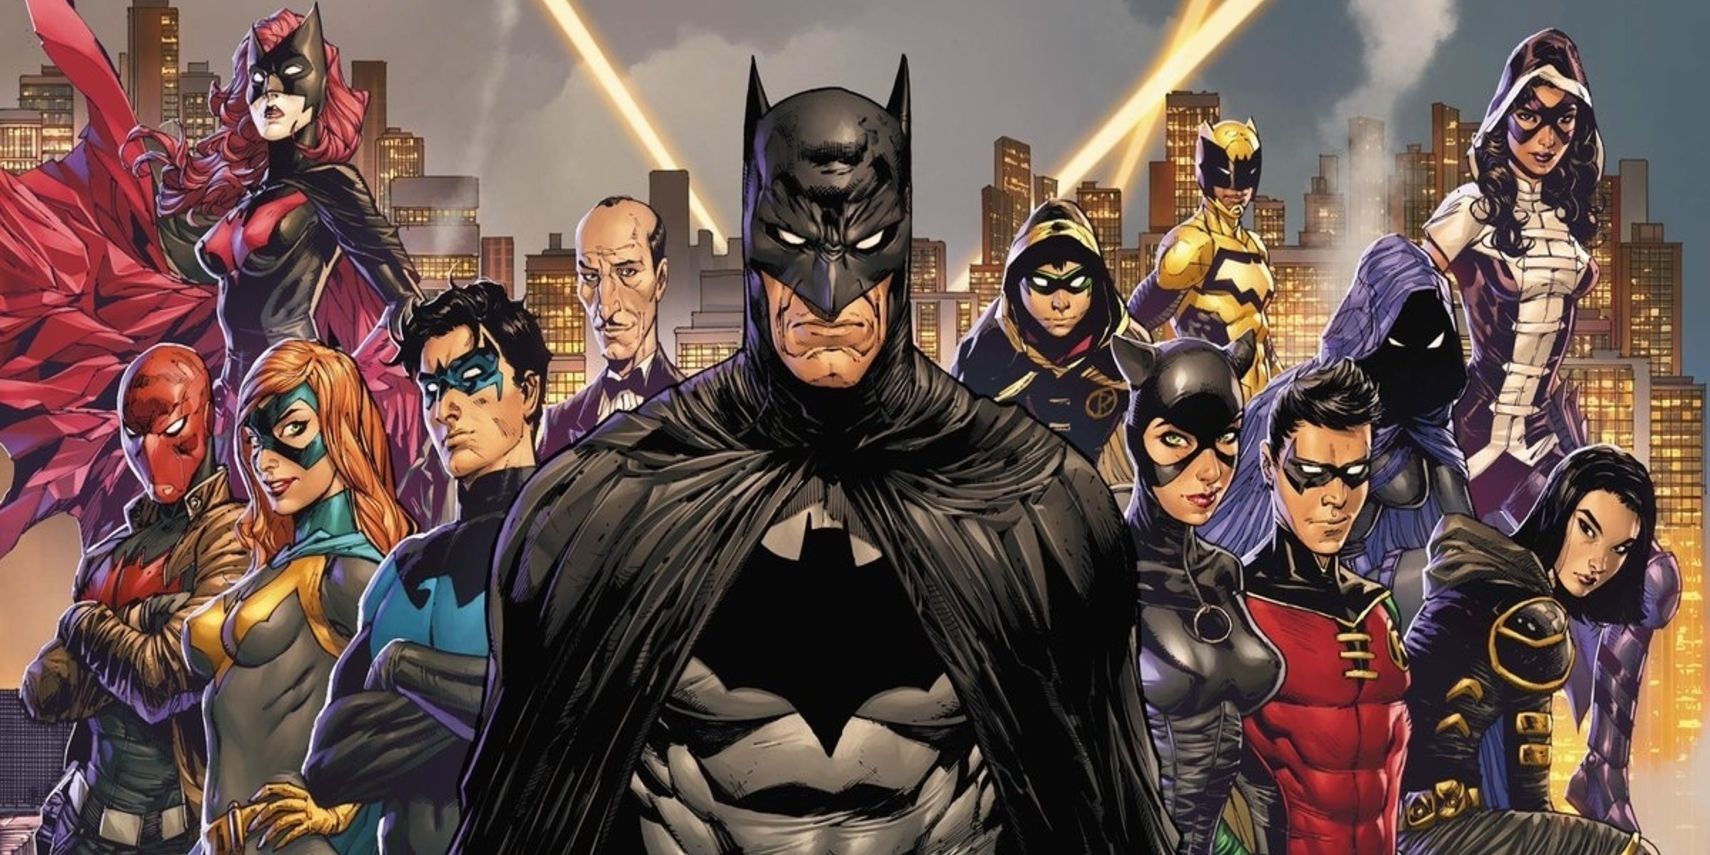 Batman standing with The Bat Family in DC Comics